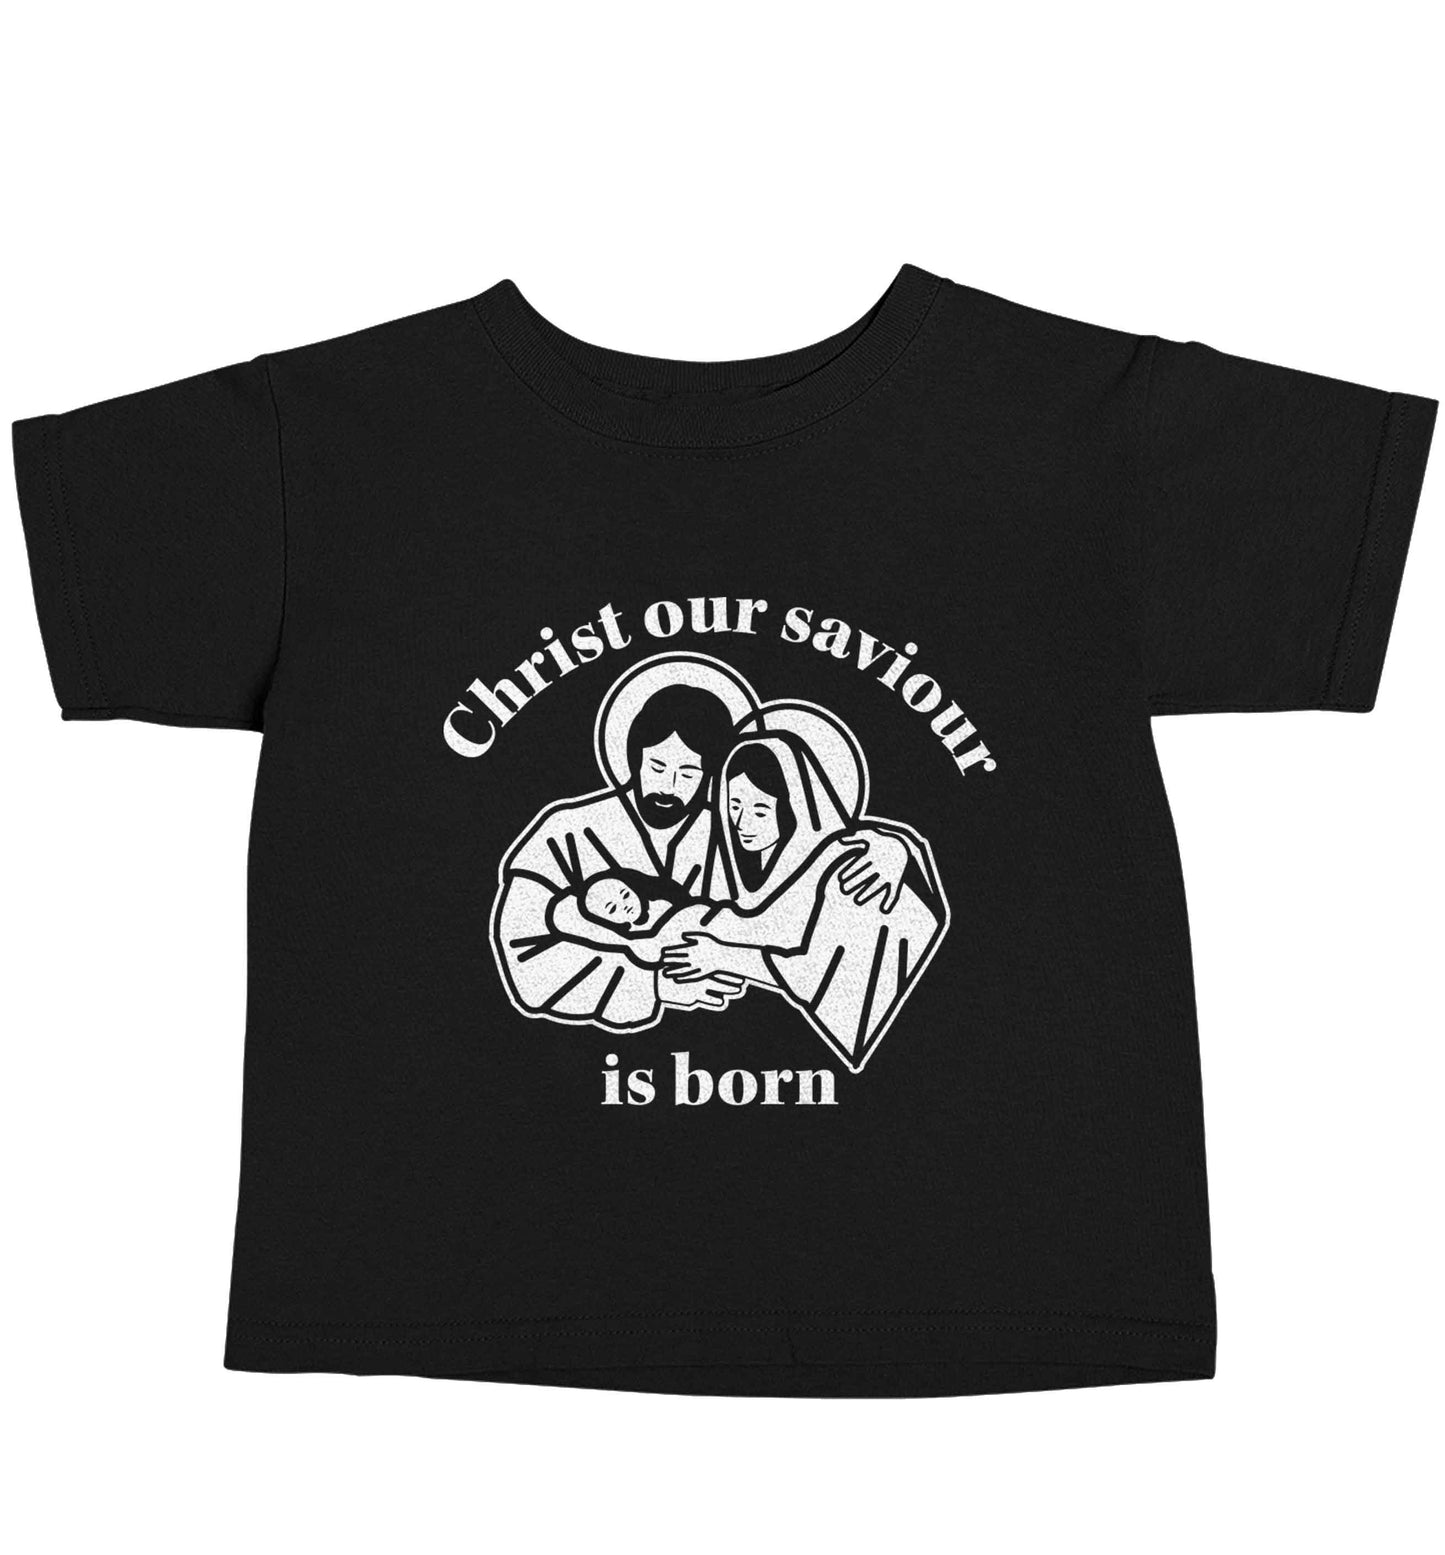 Christ our saviour is born Black baby toddler Tshirt 2 years